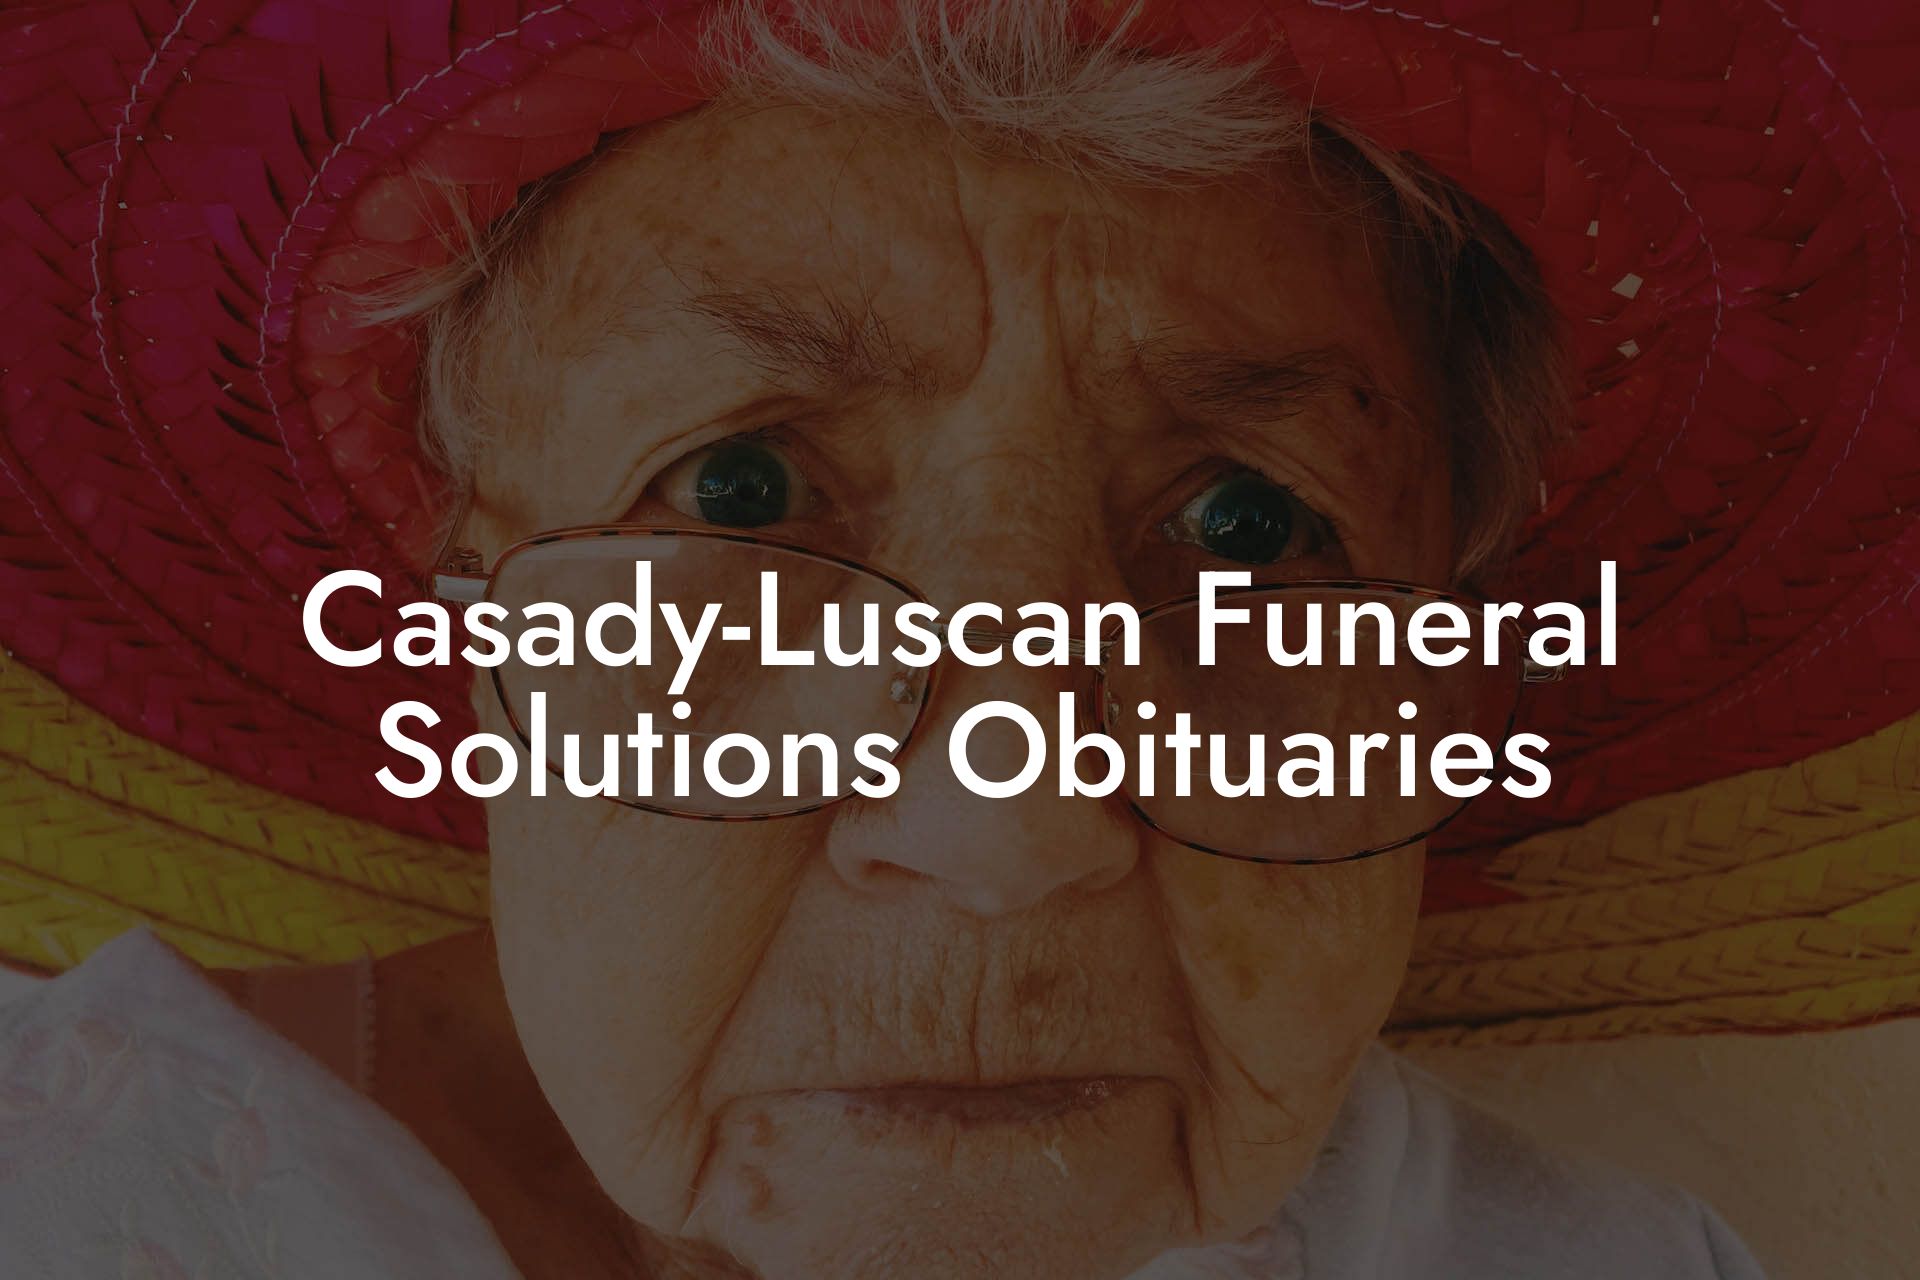 Casady-Luscan Funeral Solutions Obituaries